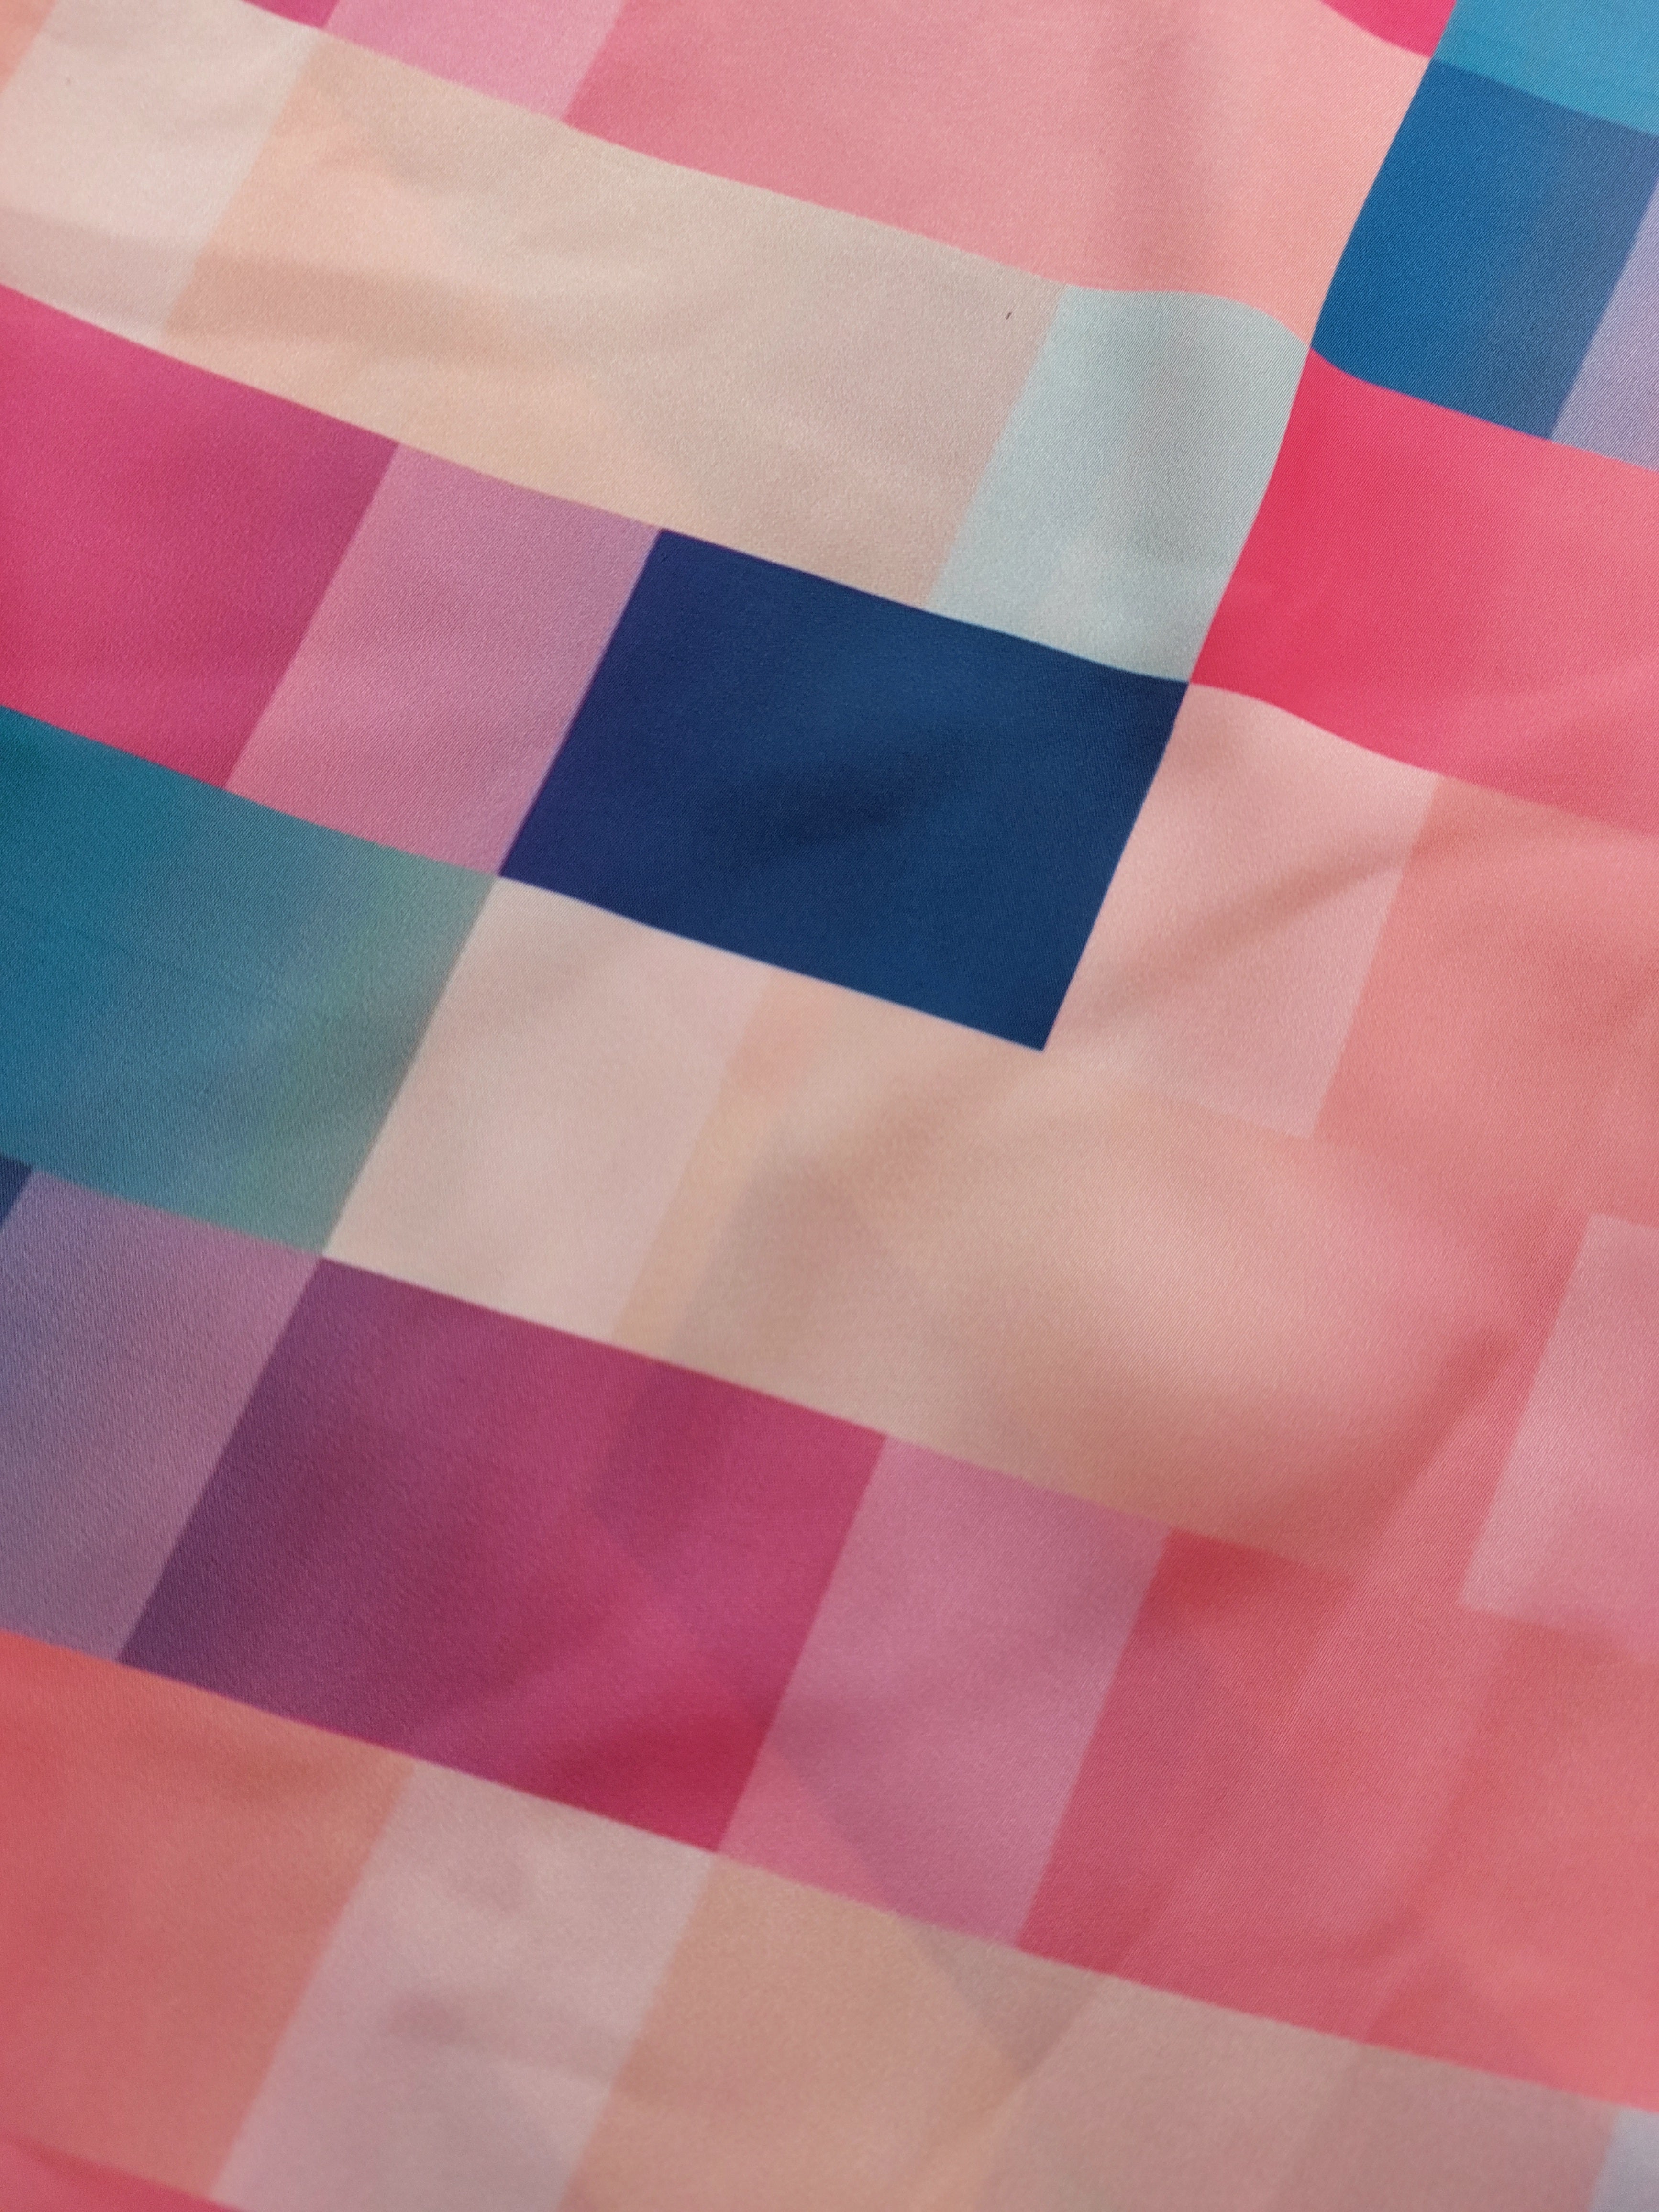 Abstract Multicolored Digital Printed Modal Satin Fabric. Fabric Geometrical Multicolored Digital Printed Modal Satin Fabric. Fabric 